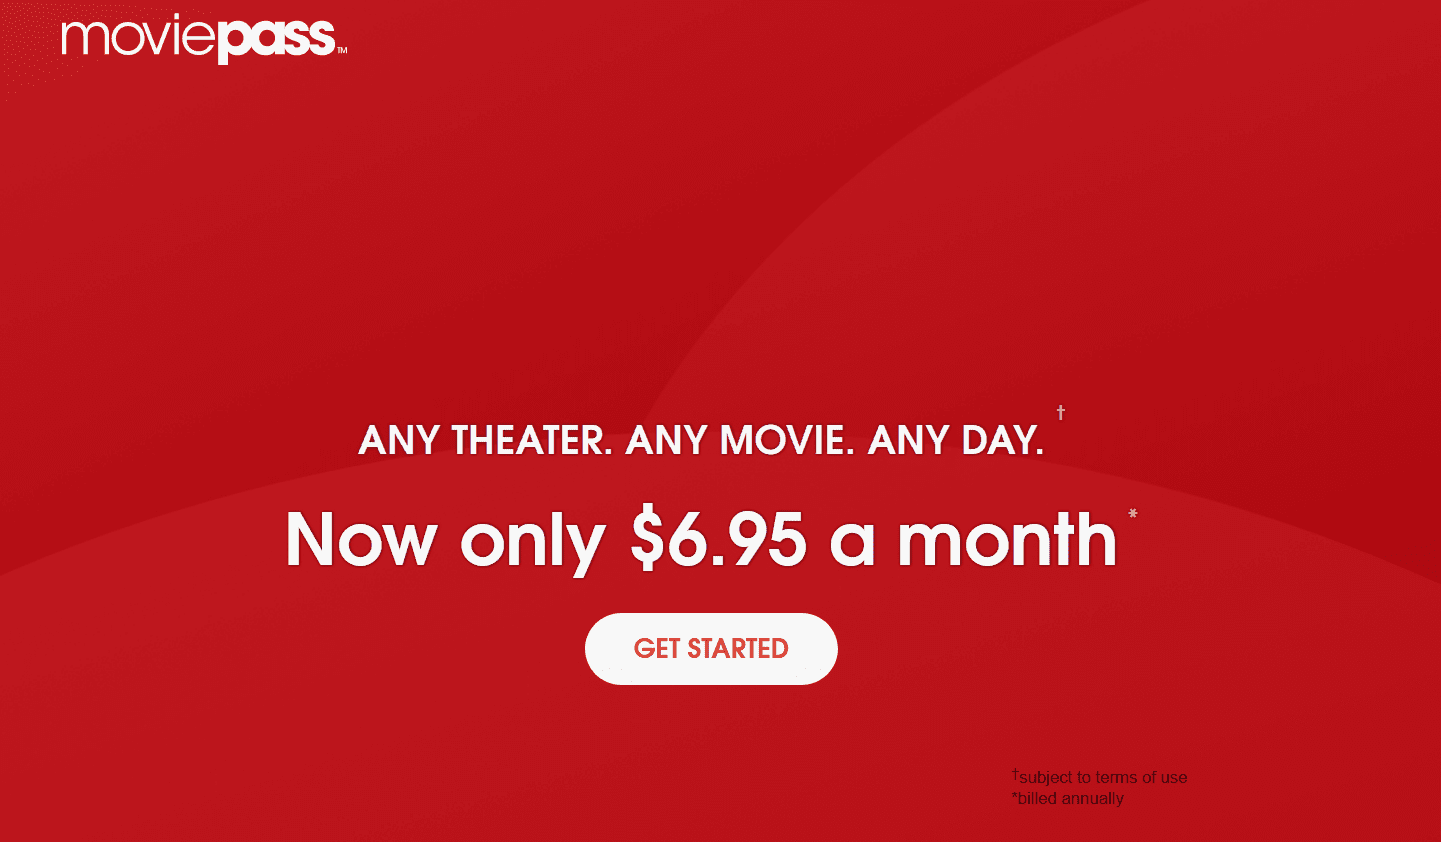 MoviePass Cuts Price for a Limited Time